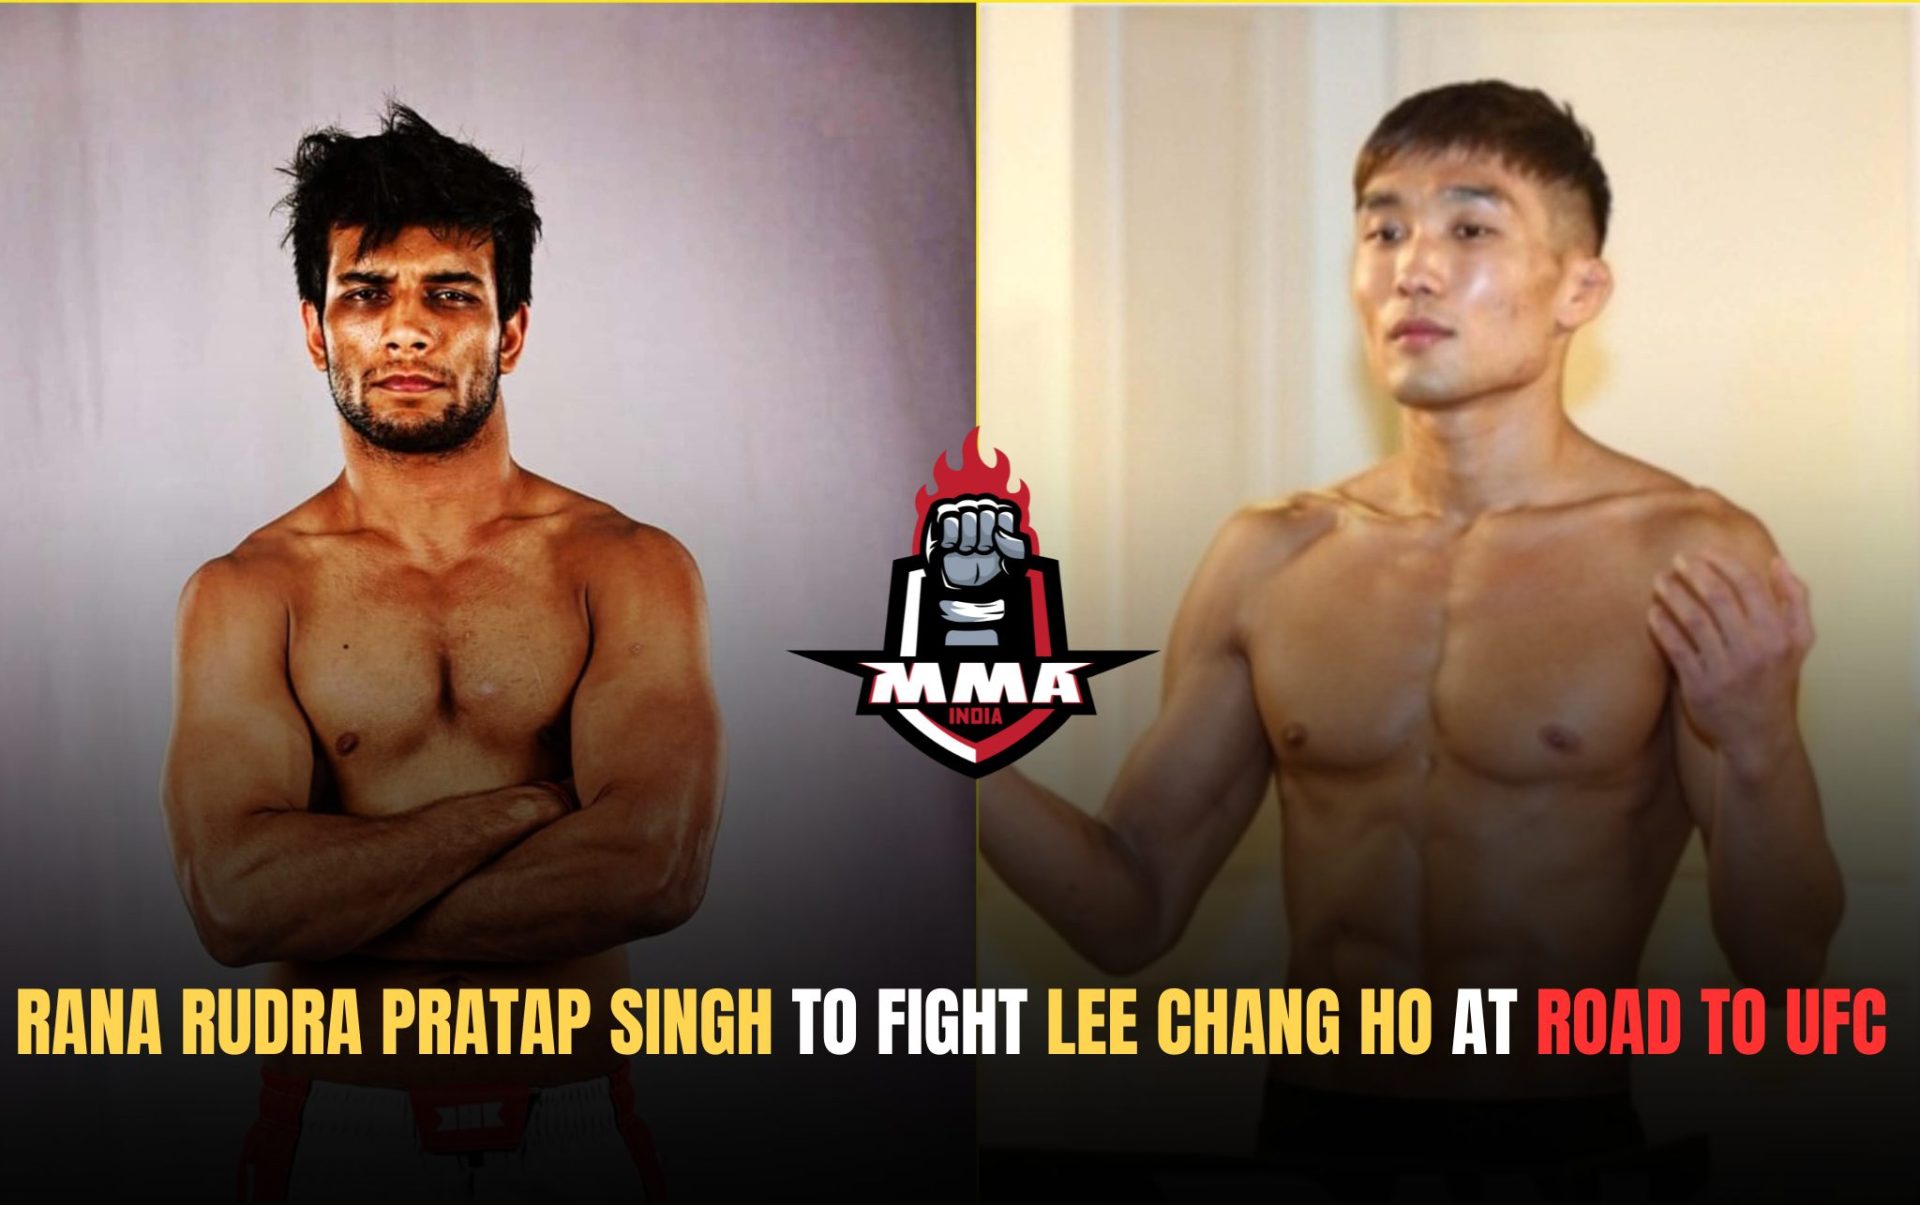 Rana Rudra Pratap Singh to fight Lee Chang Ho at Road to UFC in Sanghai